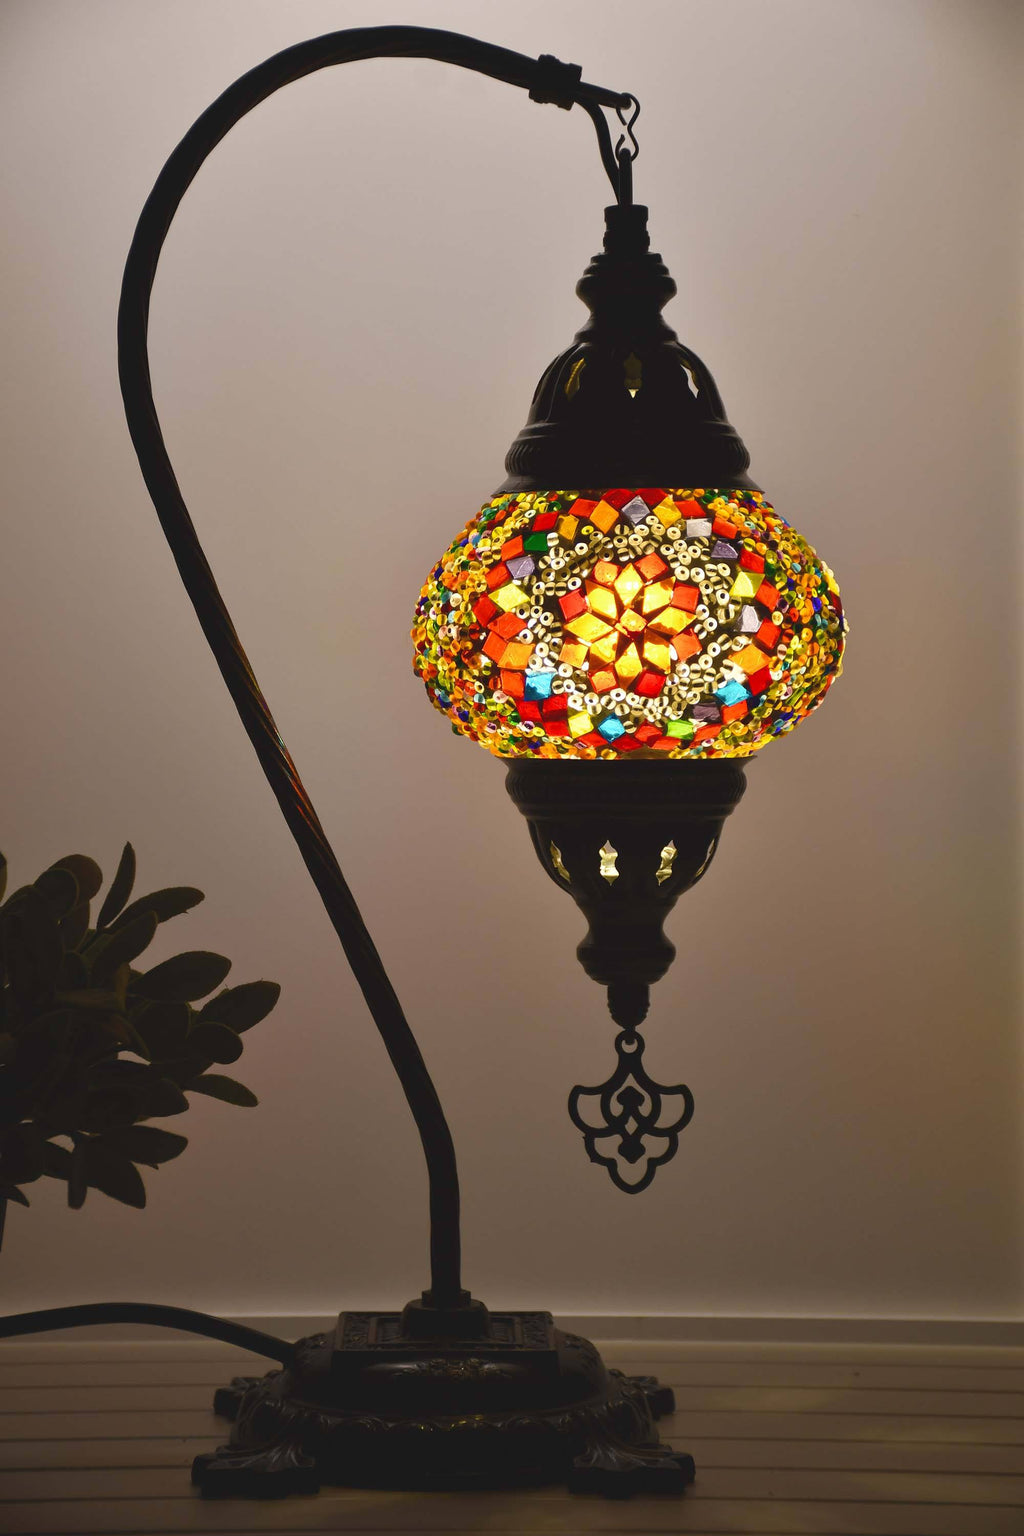 Turkish Lamp Hanging Colourful Beads Red Rounded Lighting Sydney Grand Bazaar 